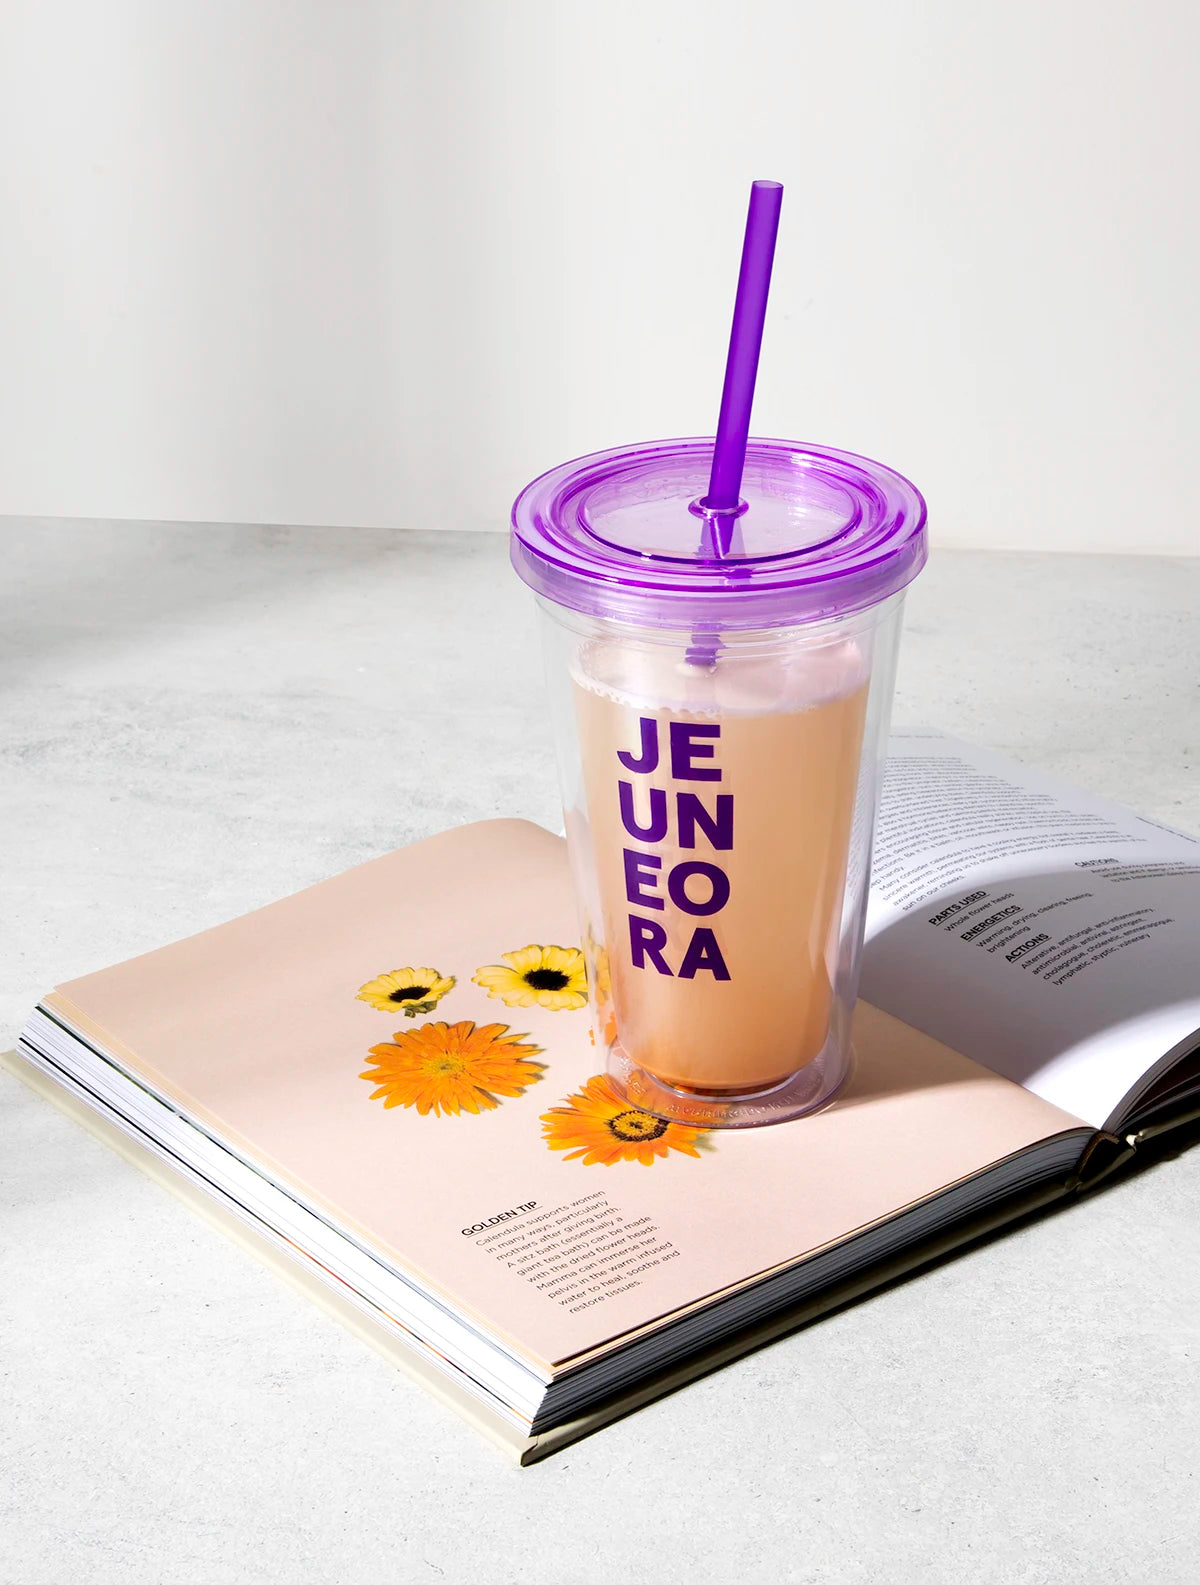 Jeuneora tumbler cup for cold drinks with magazine